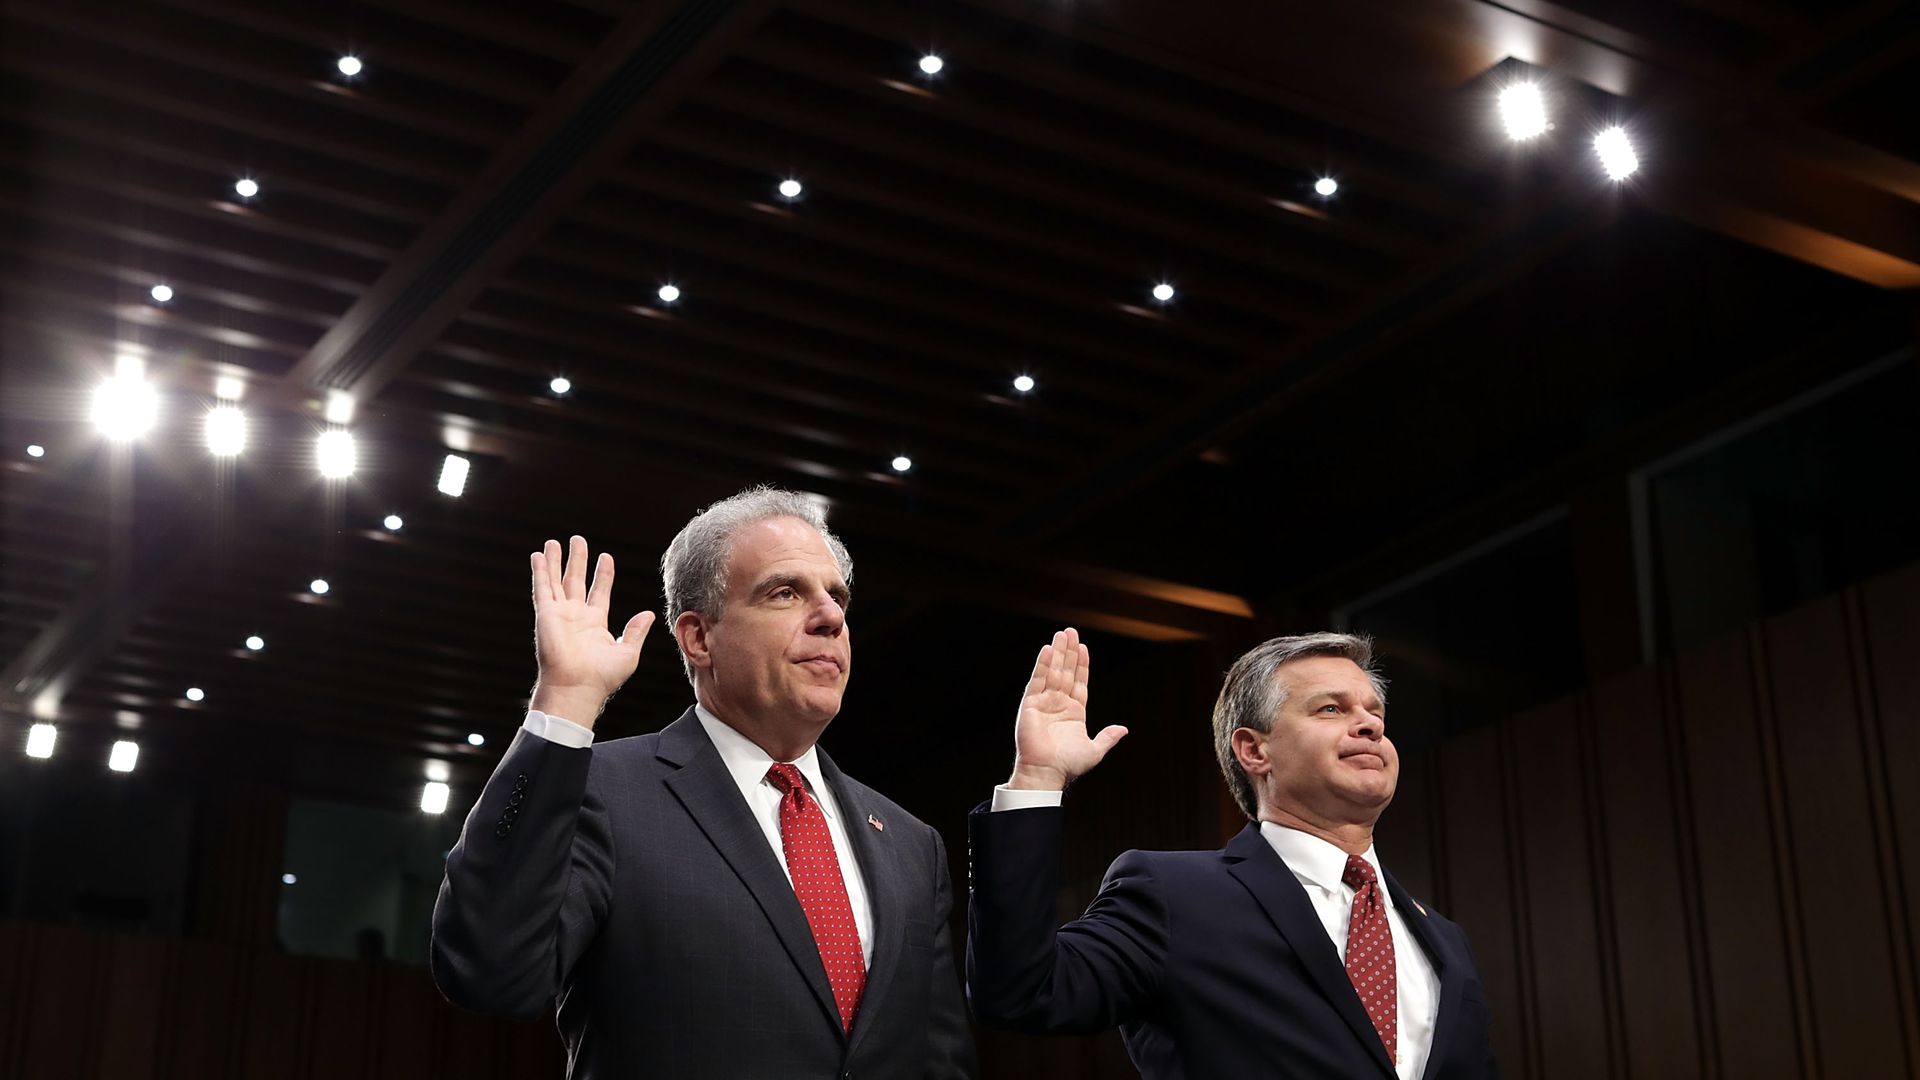 Justice Department Inspector General Michael Horowitz and FBI Director Christopher Wray are sworn in before testifying to the Senate Judiciary Committee 